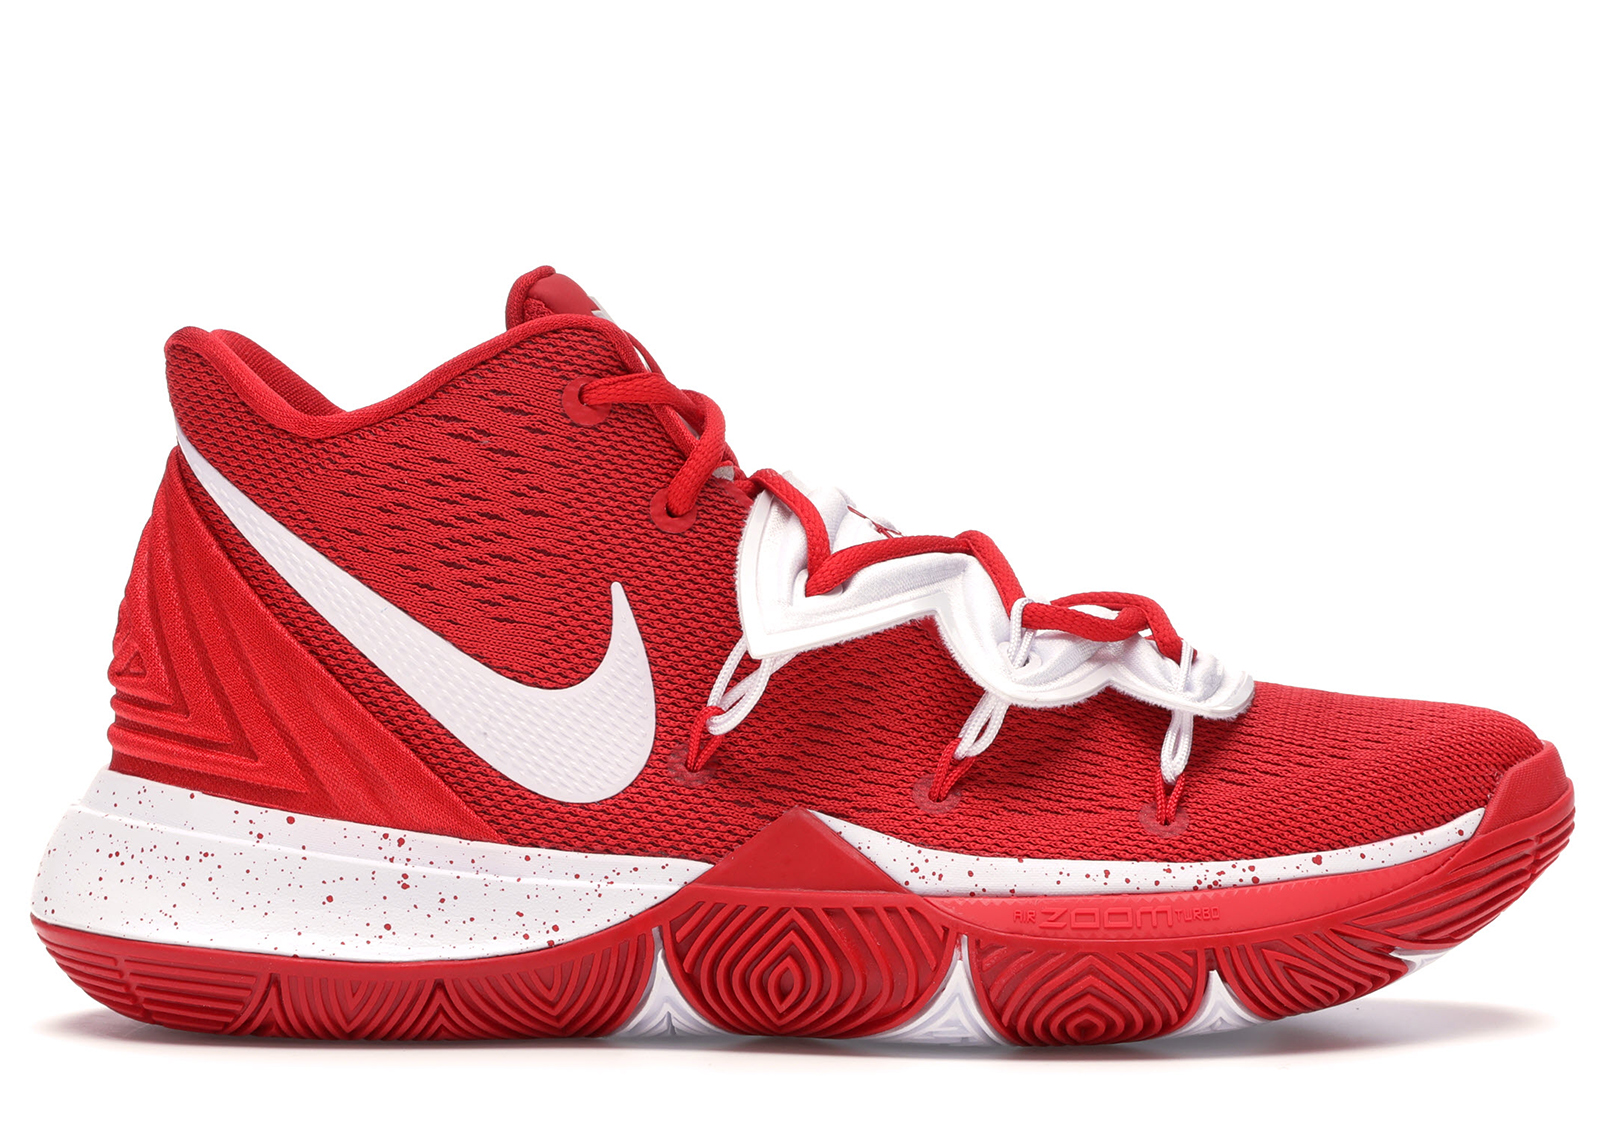 kyrie 5 friends red